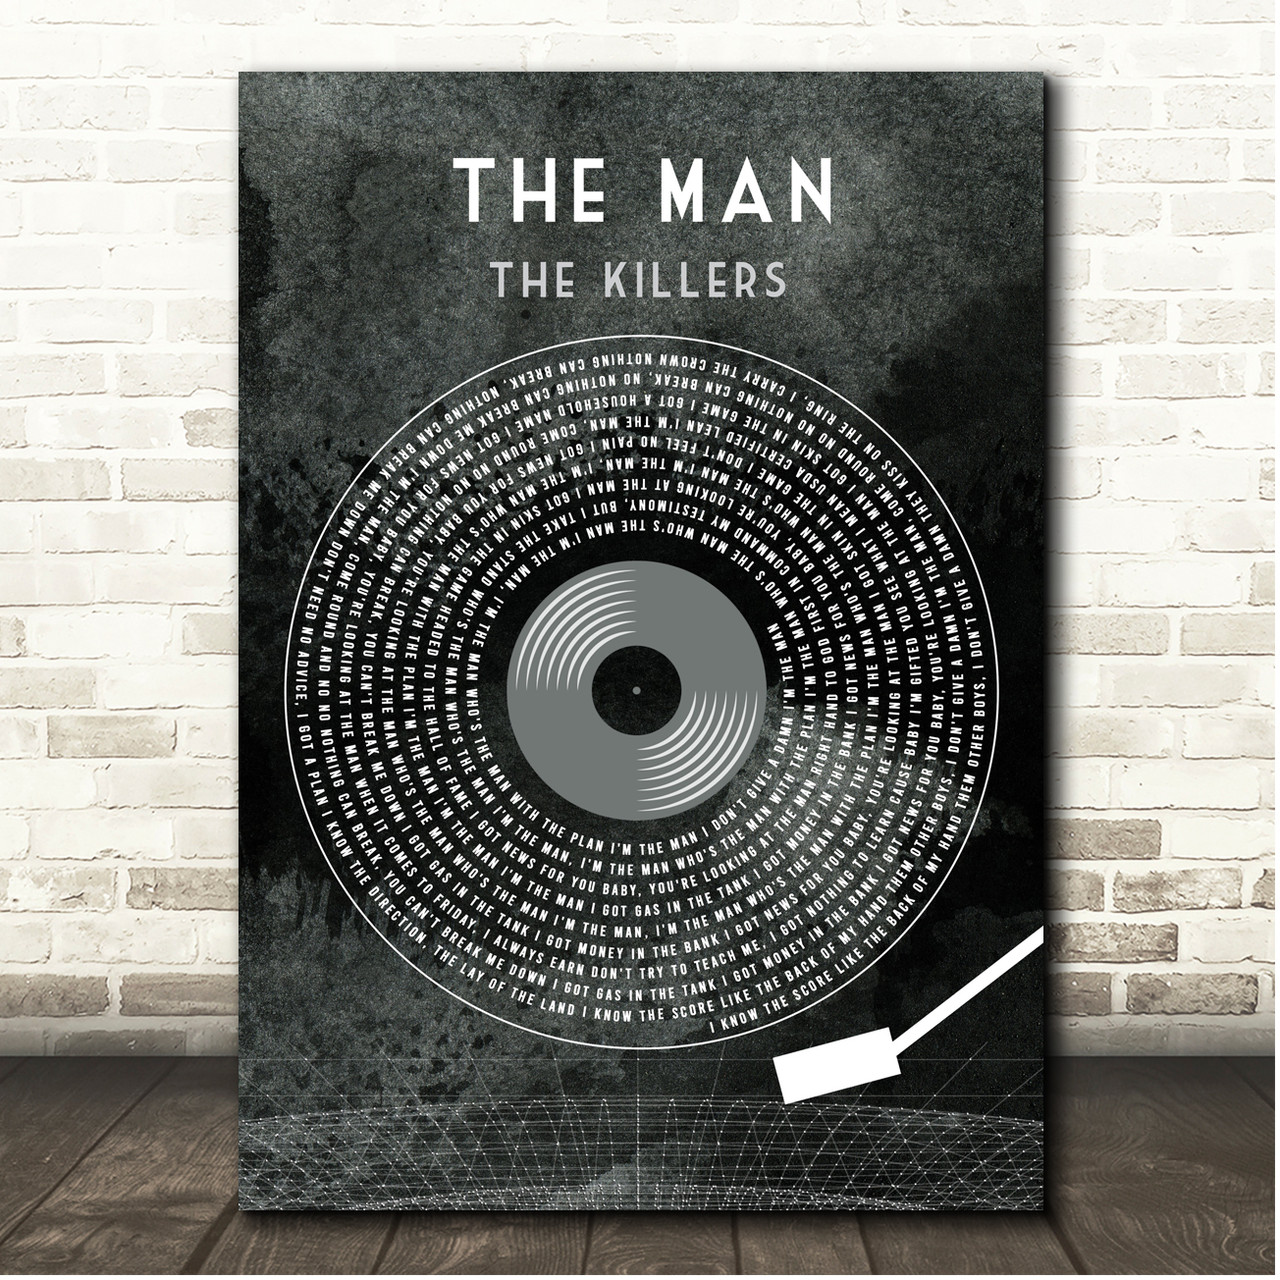 The Killers - The Man 